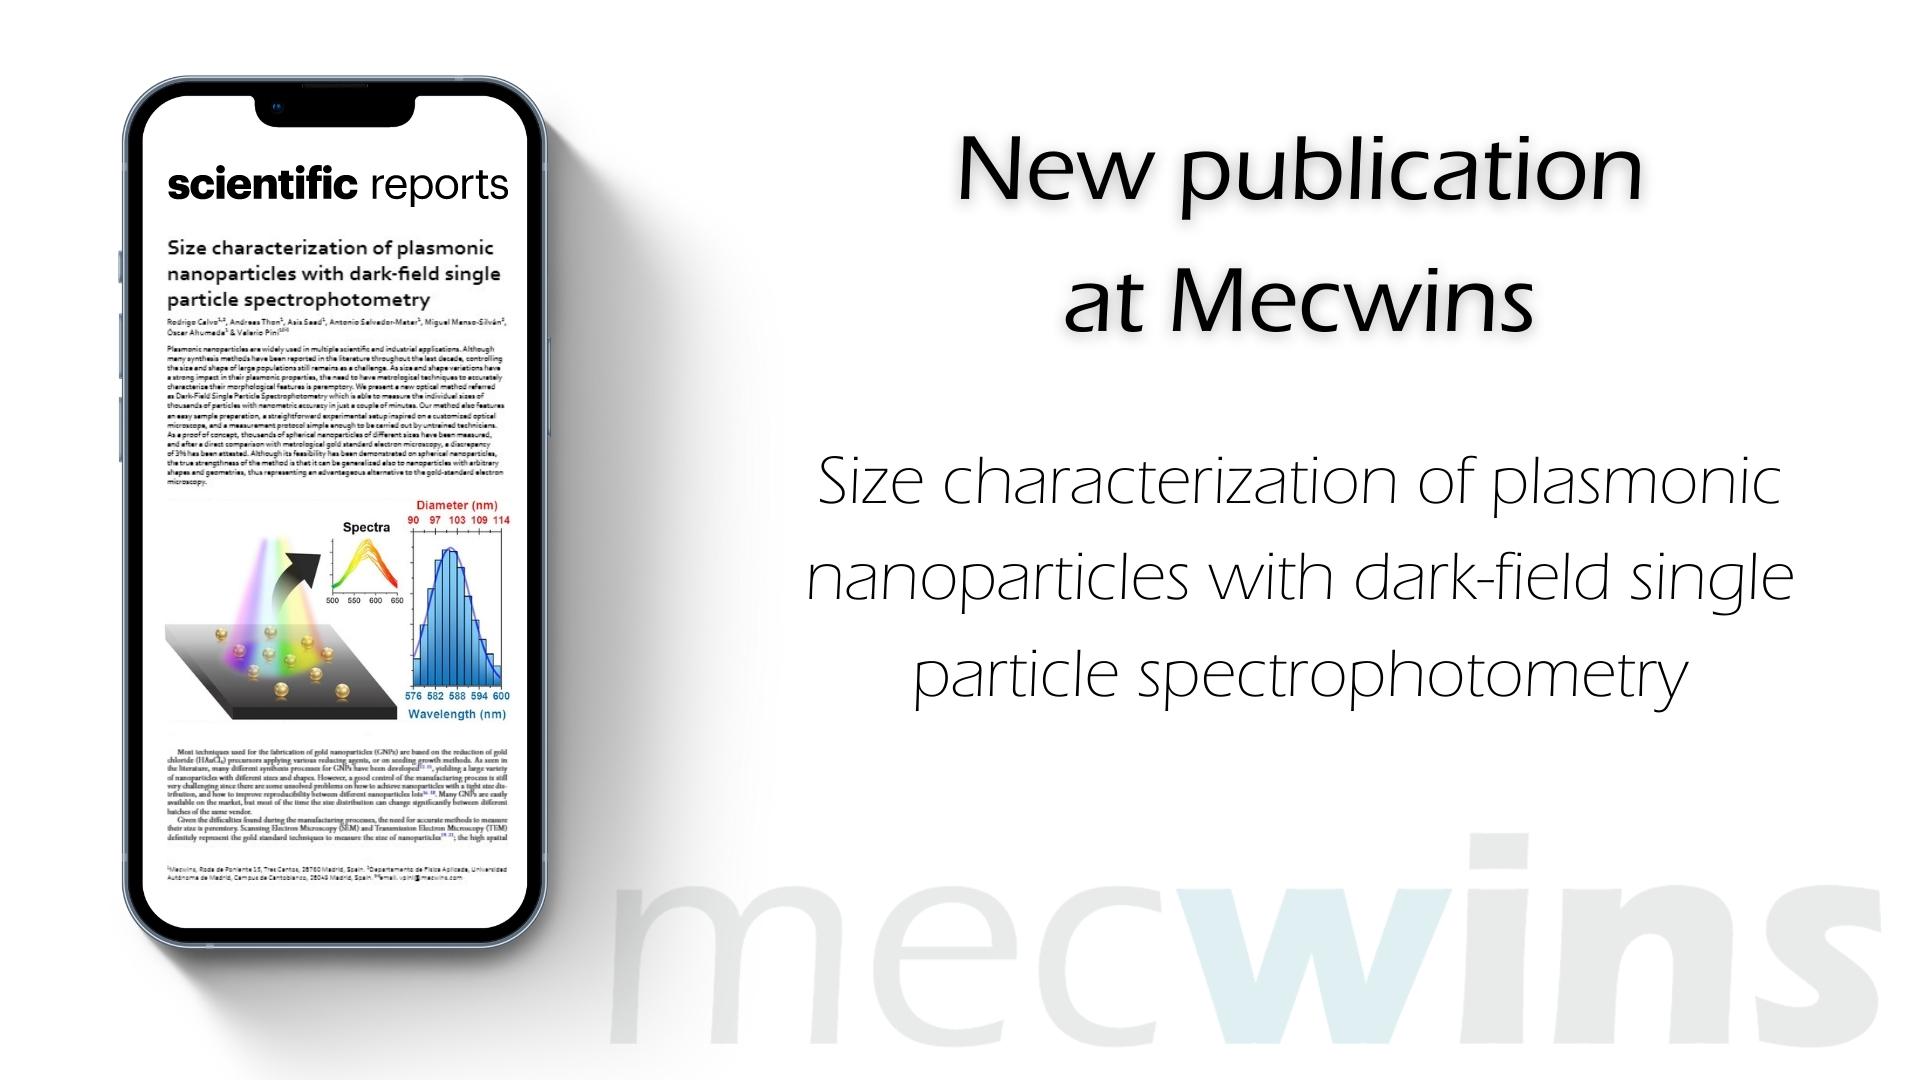 New publication at Mecwins